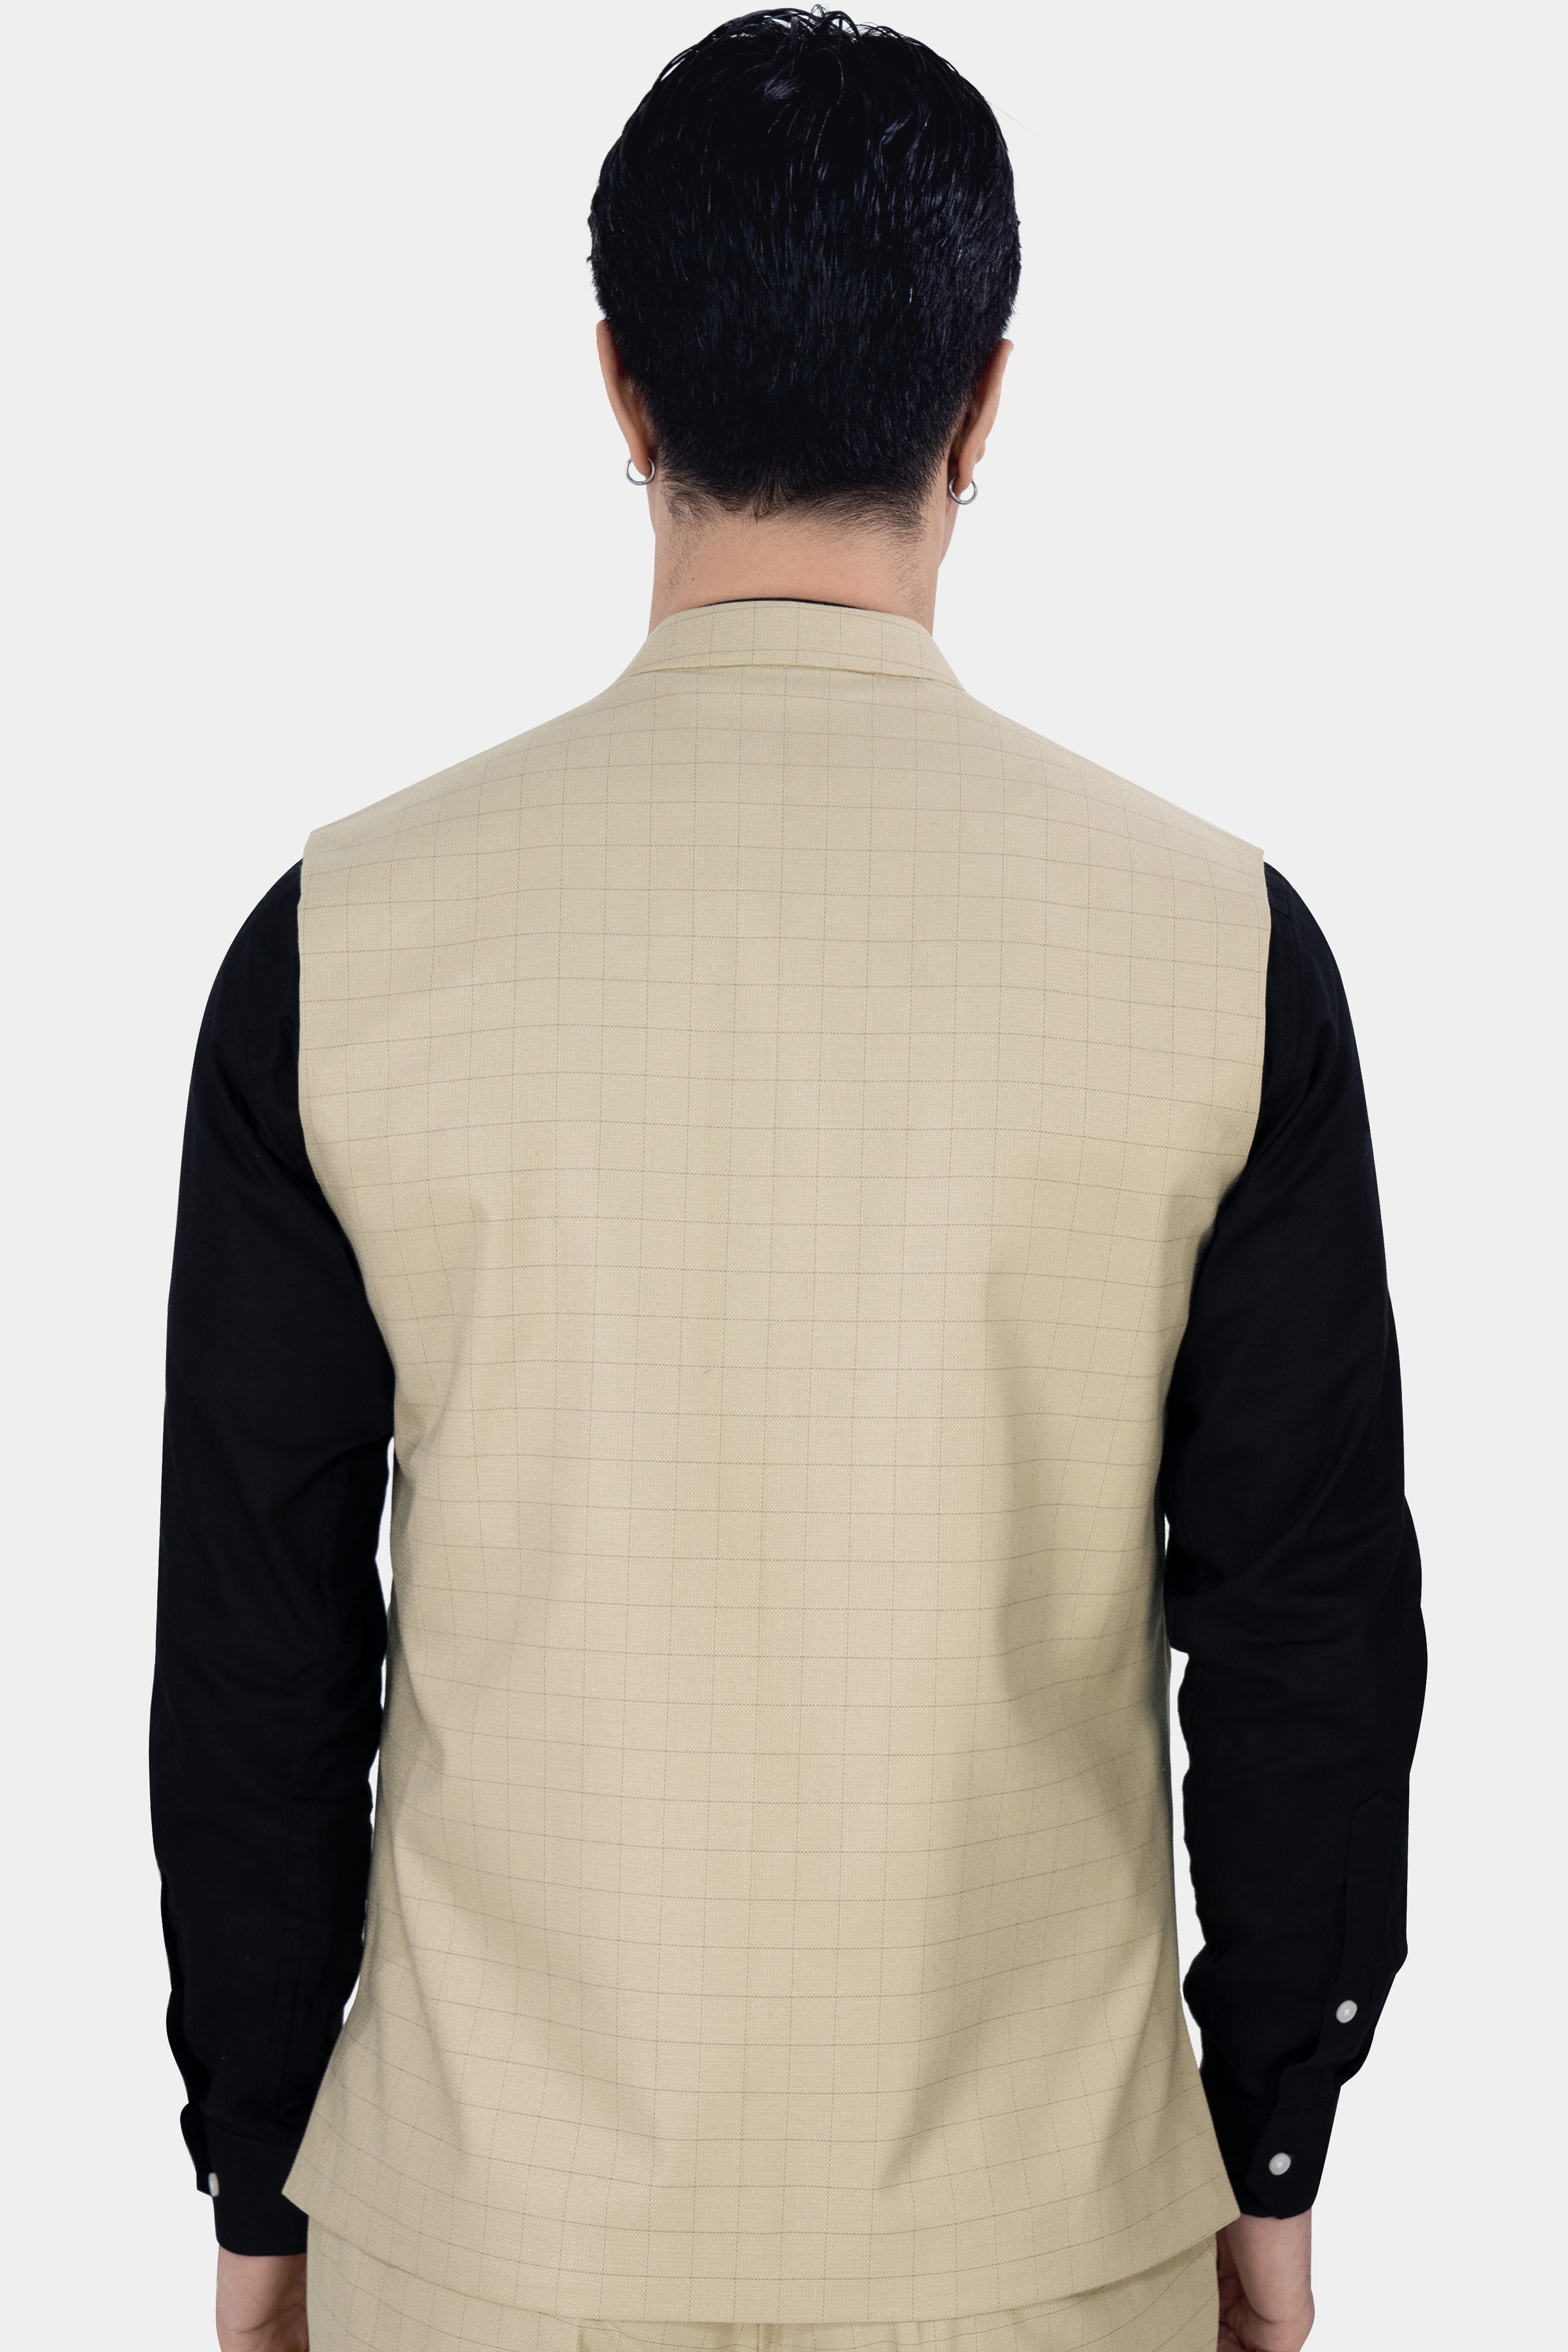 Pavlova Brown with Taupe Brown Checkered Dobby Wool Rich Nehru Jacket WC2878-36, WC2878-38, WC2878-40, WC2878-42, WC2878-44, WC2878-46, WC2878-48, WC2878-50, WC2878-52, WC2878-54, WC2878-56, WC2878-58, WC2878-60